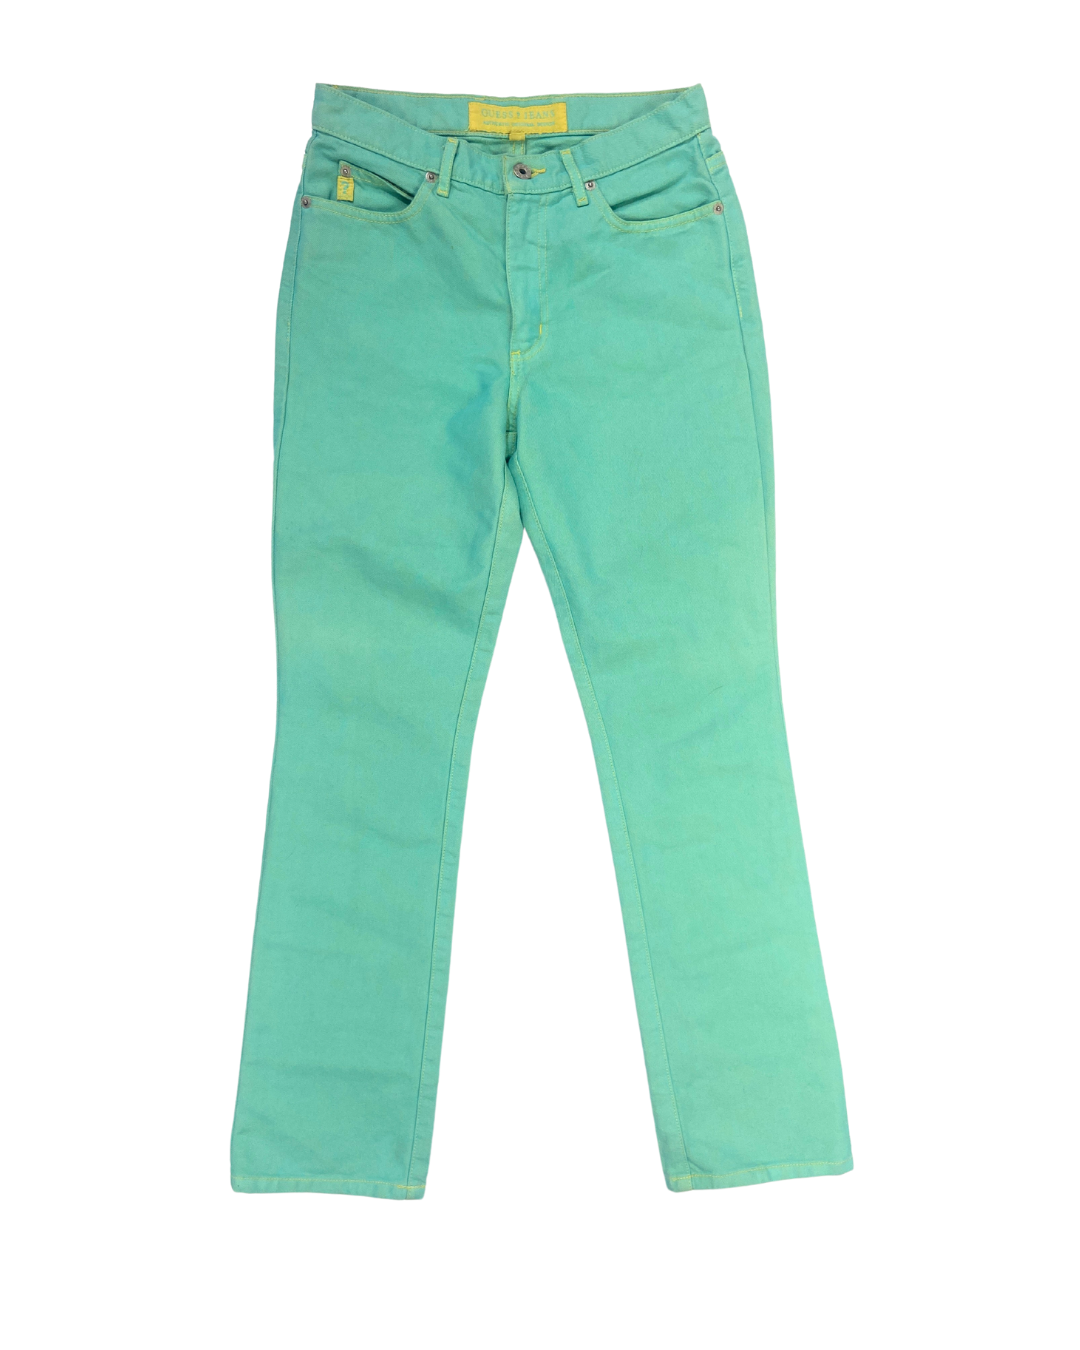 Guess Turquoise Straight Leg Jeans